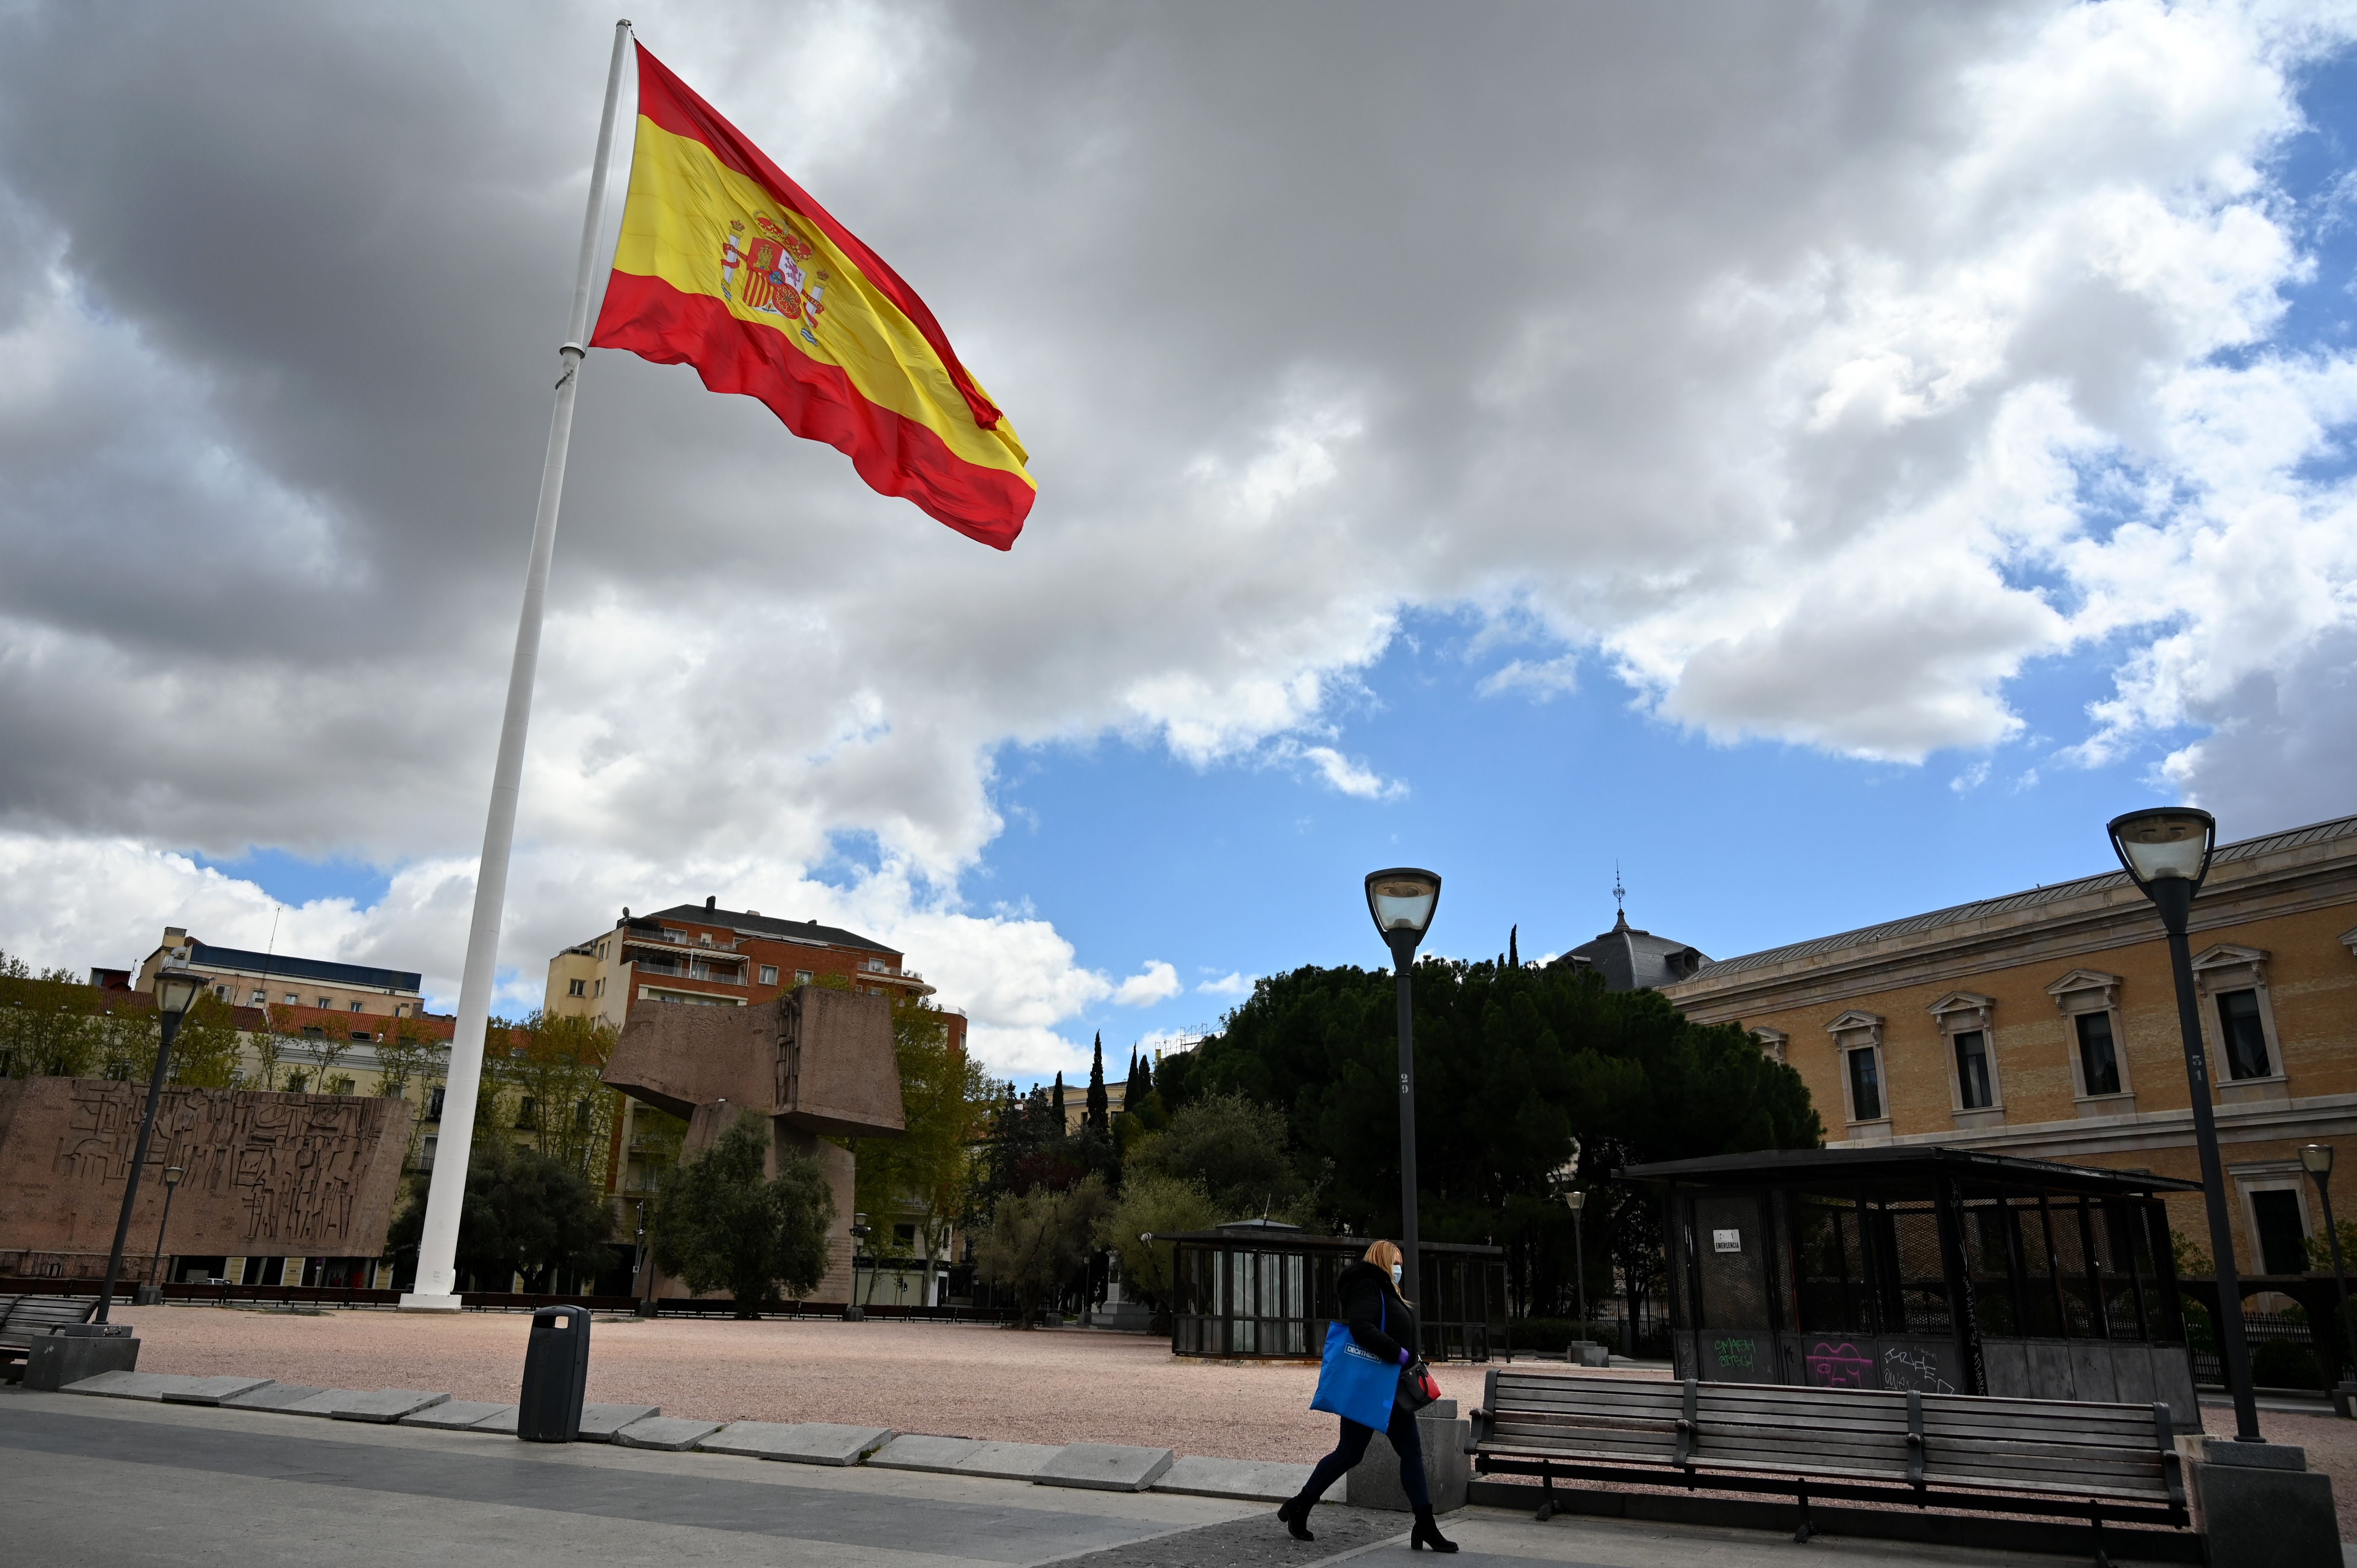 After 270 days, the original course of vaccines is no longer valid in Spain